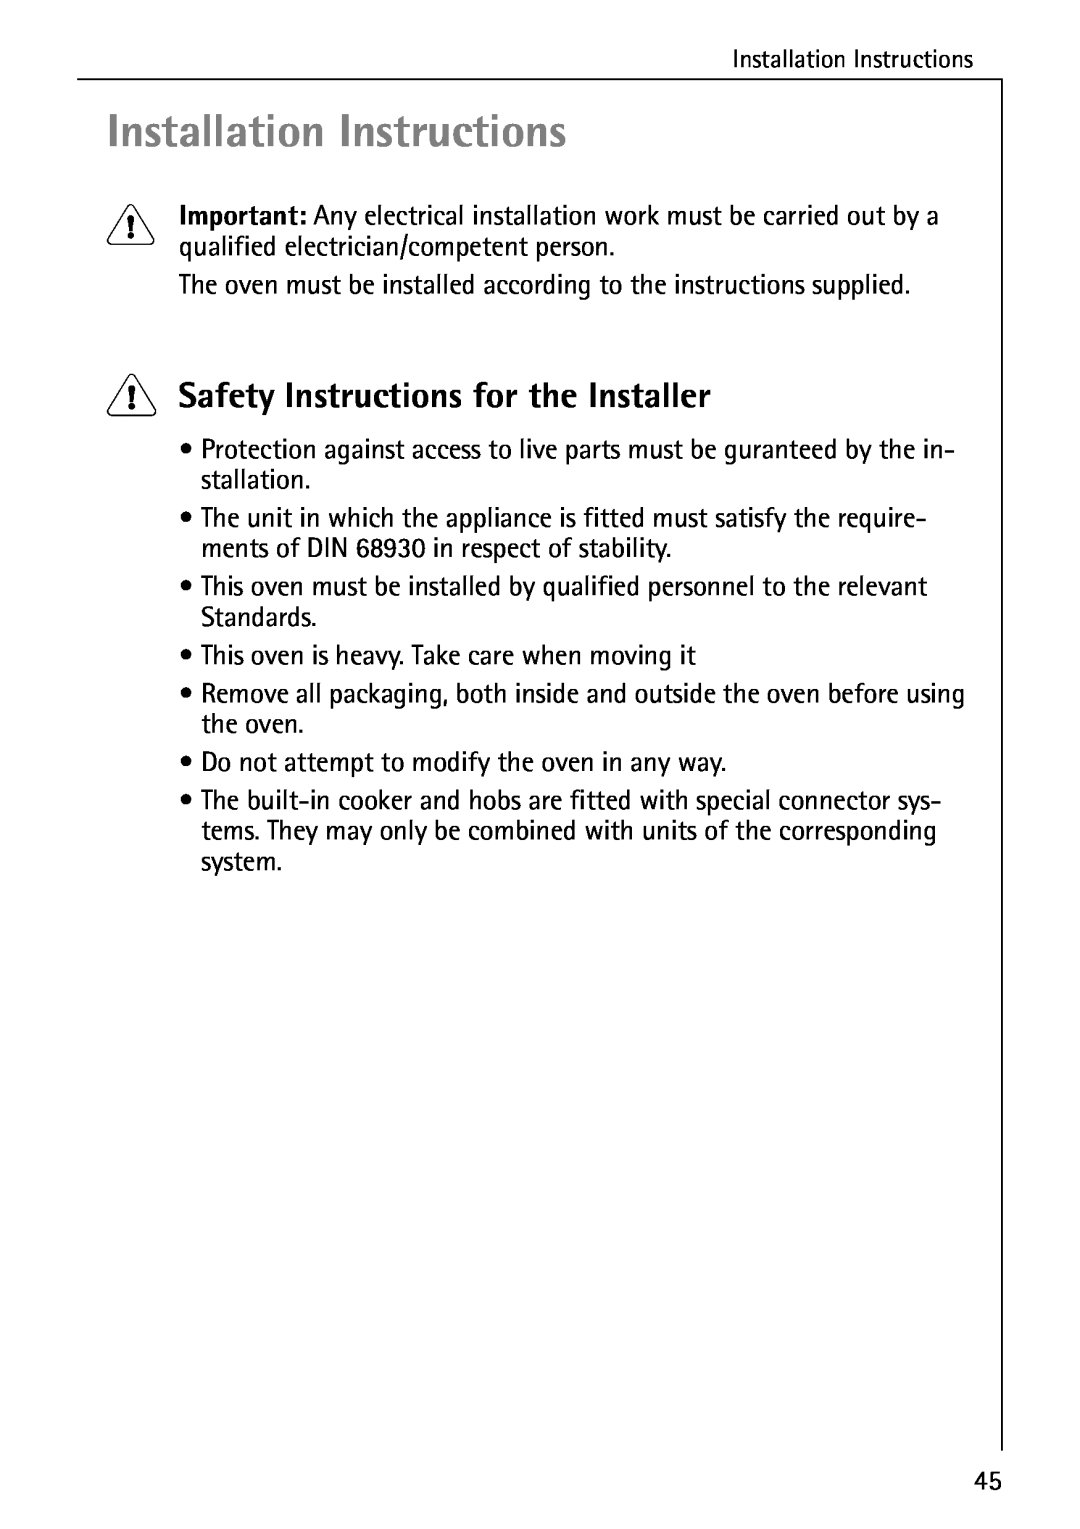 Electrolux B2190-1 manual Installation Instructions, Safety Instructions for the Installer 